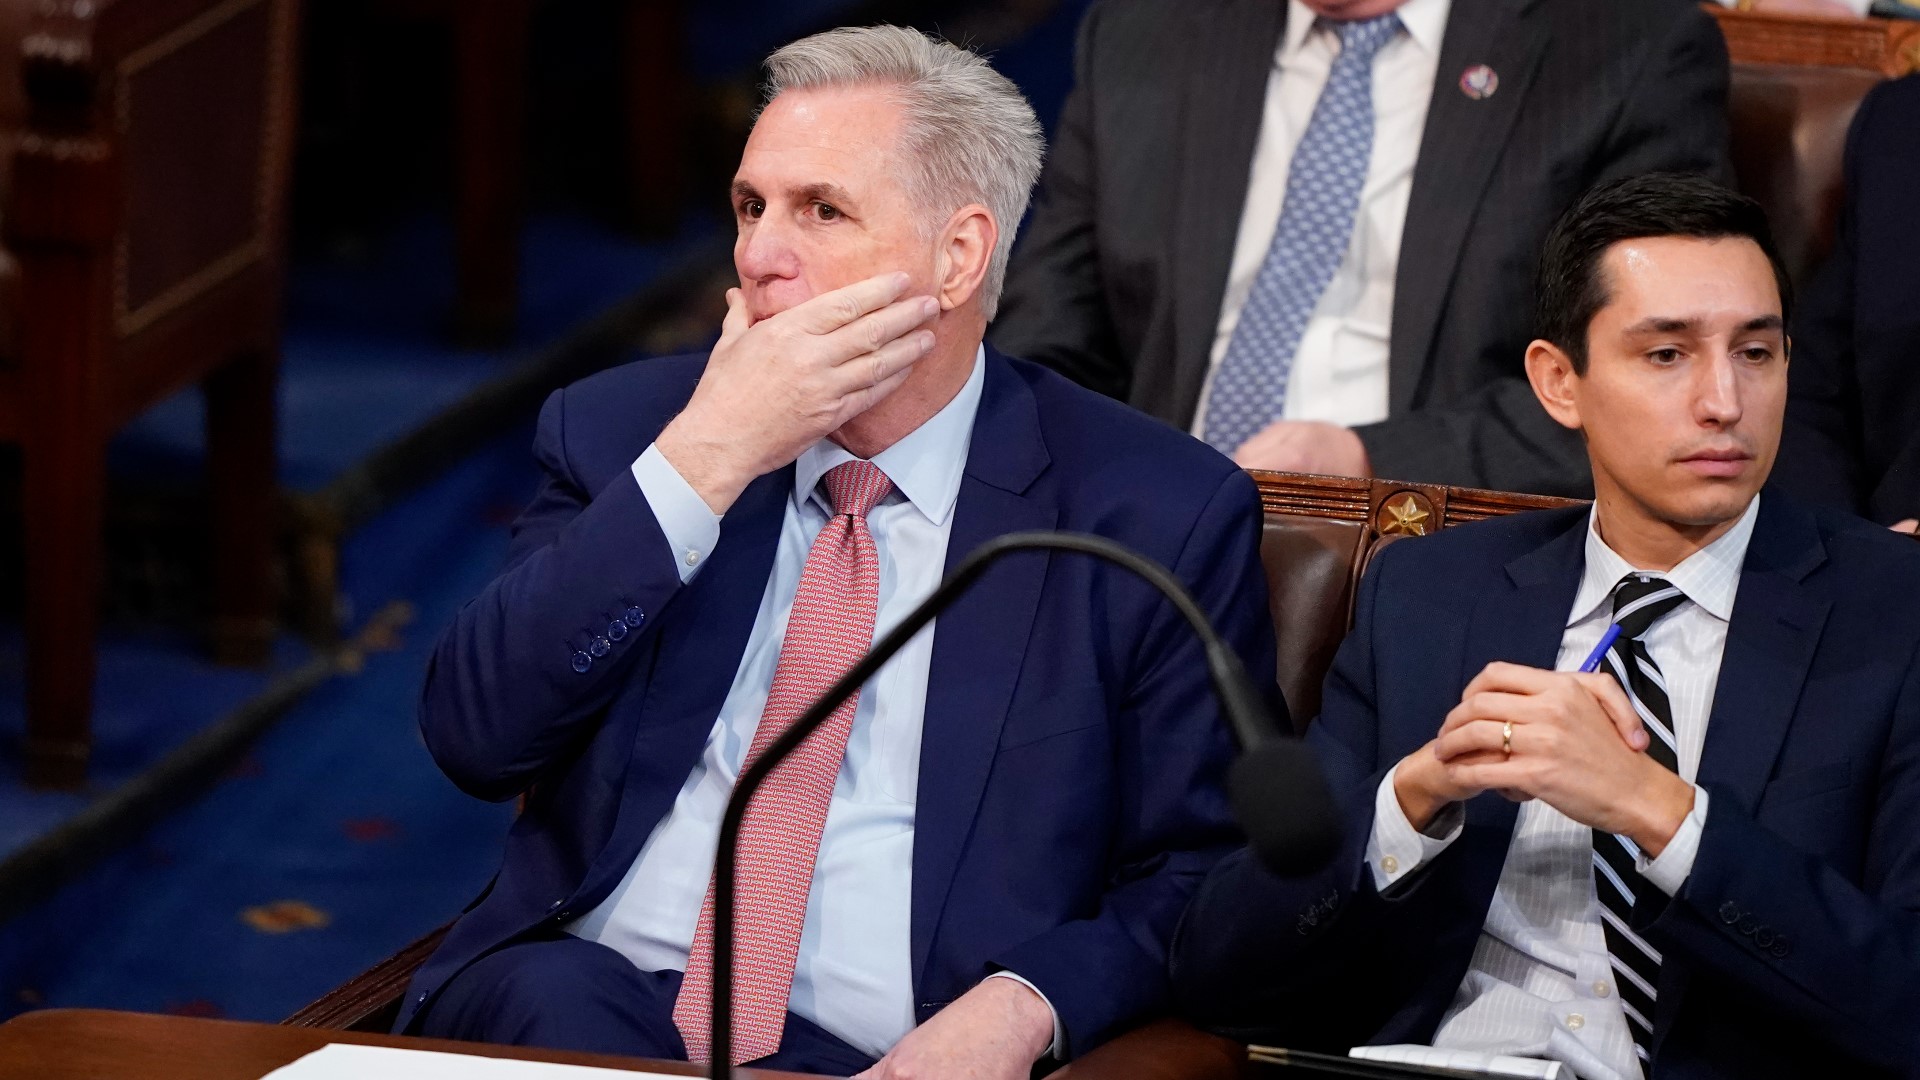 Republican leader Kevin McCarthy failed anew to win the House speakership in three votes Wednesday, faring no better than he had during Tuesday's votes.